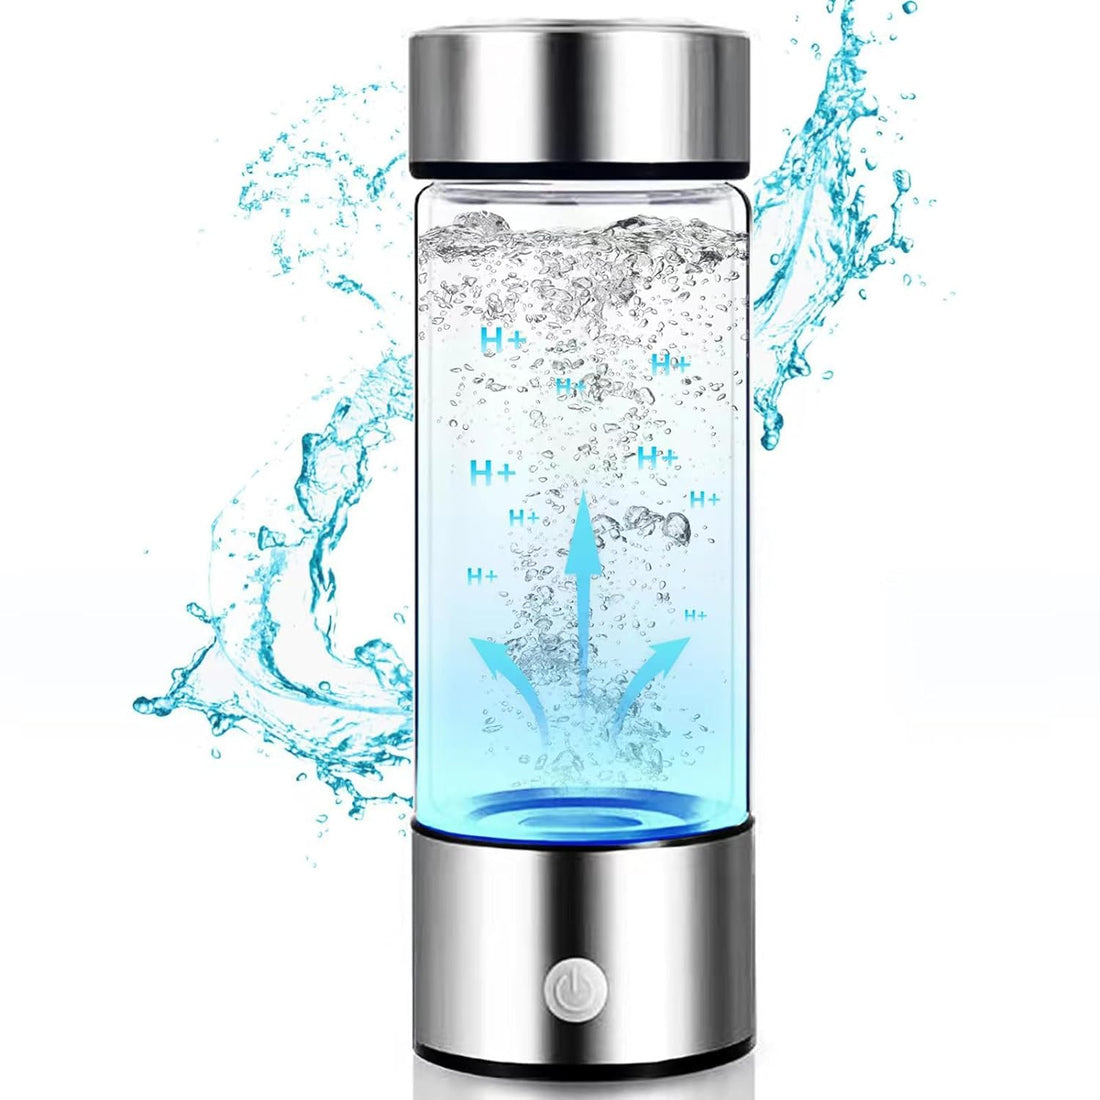 Fiudiry Hydrogen Water Bottle - A Portable Health Boosting Waterionizer Generator with SPE PEM Technology